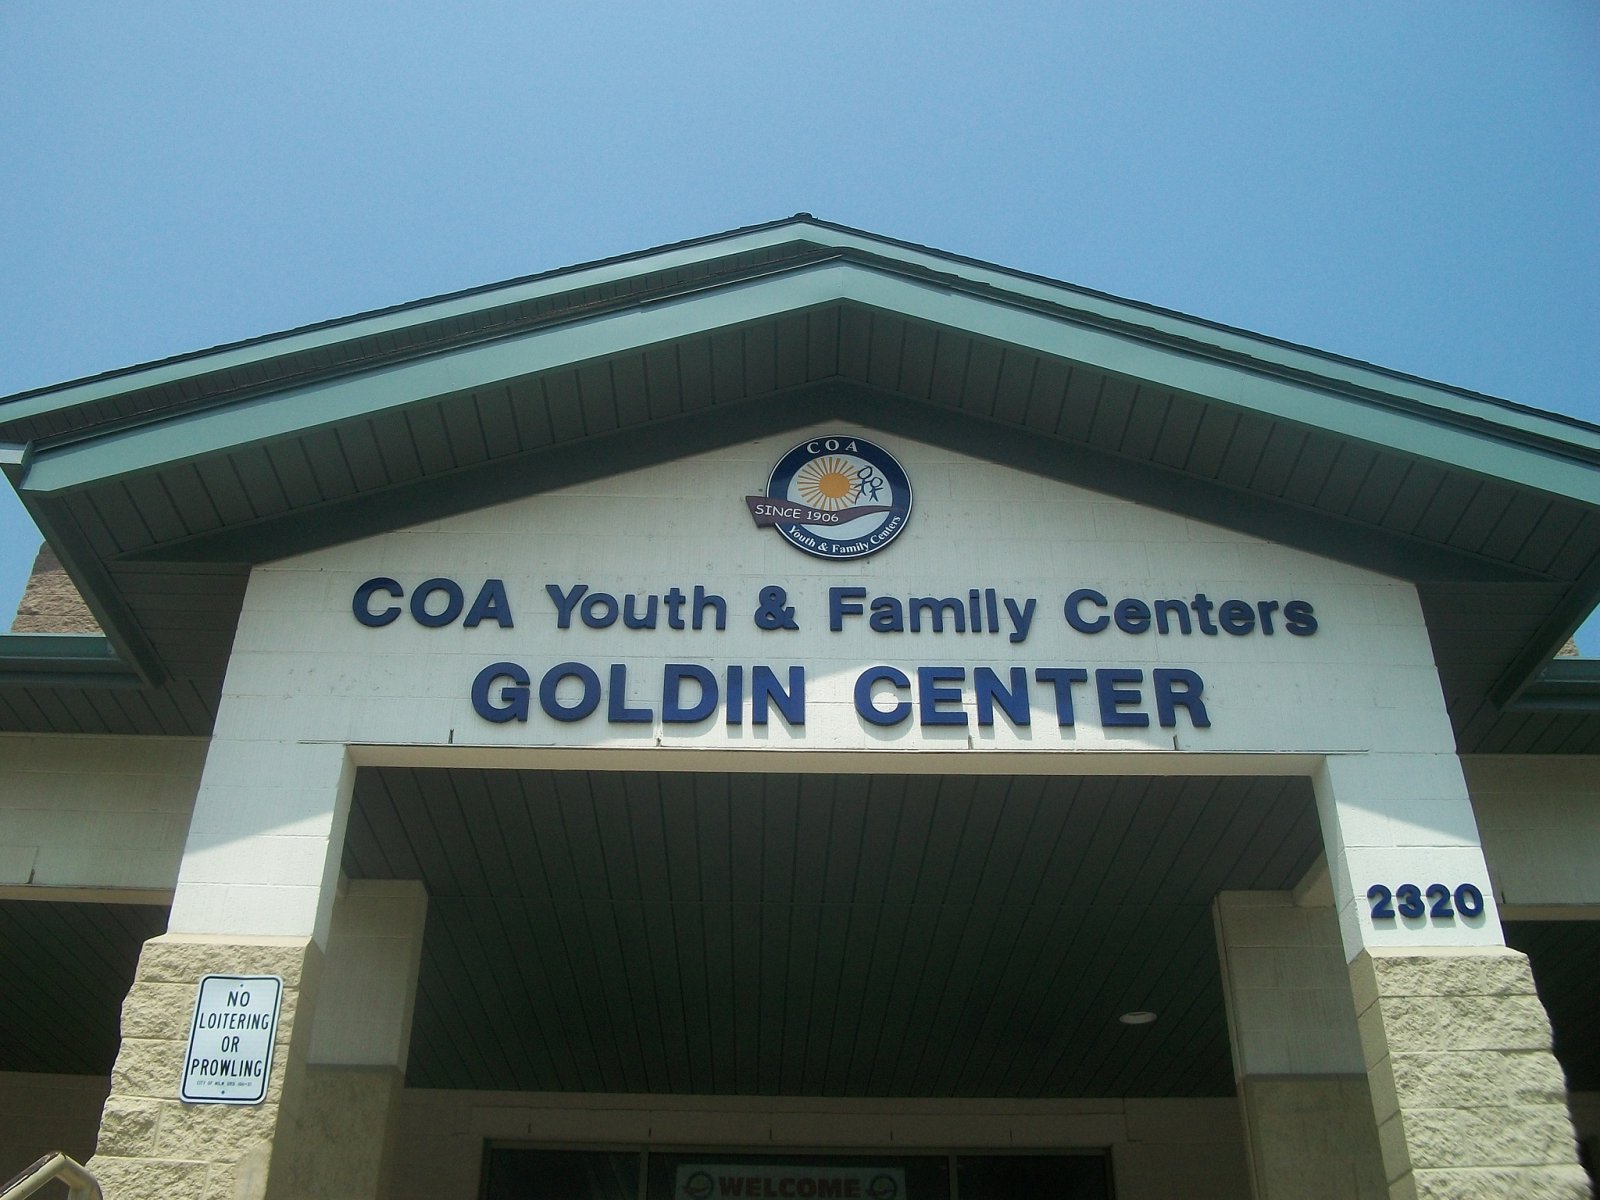 The COA opened their Goldin Center on Burleigh Street in 2005. The 54,000 square foot facility features a wide variety of health, education, and recreation facilities for children of all ages and their families.